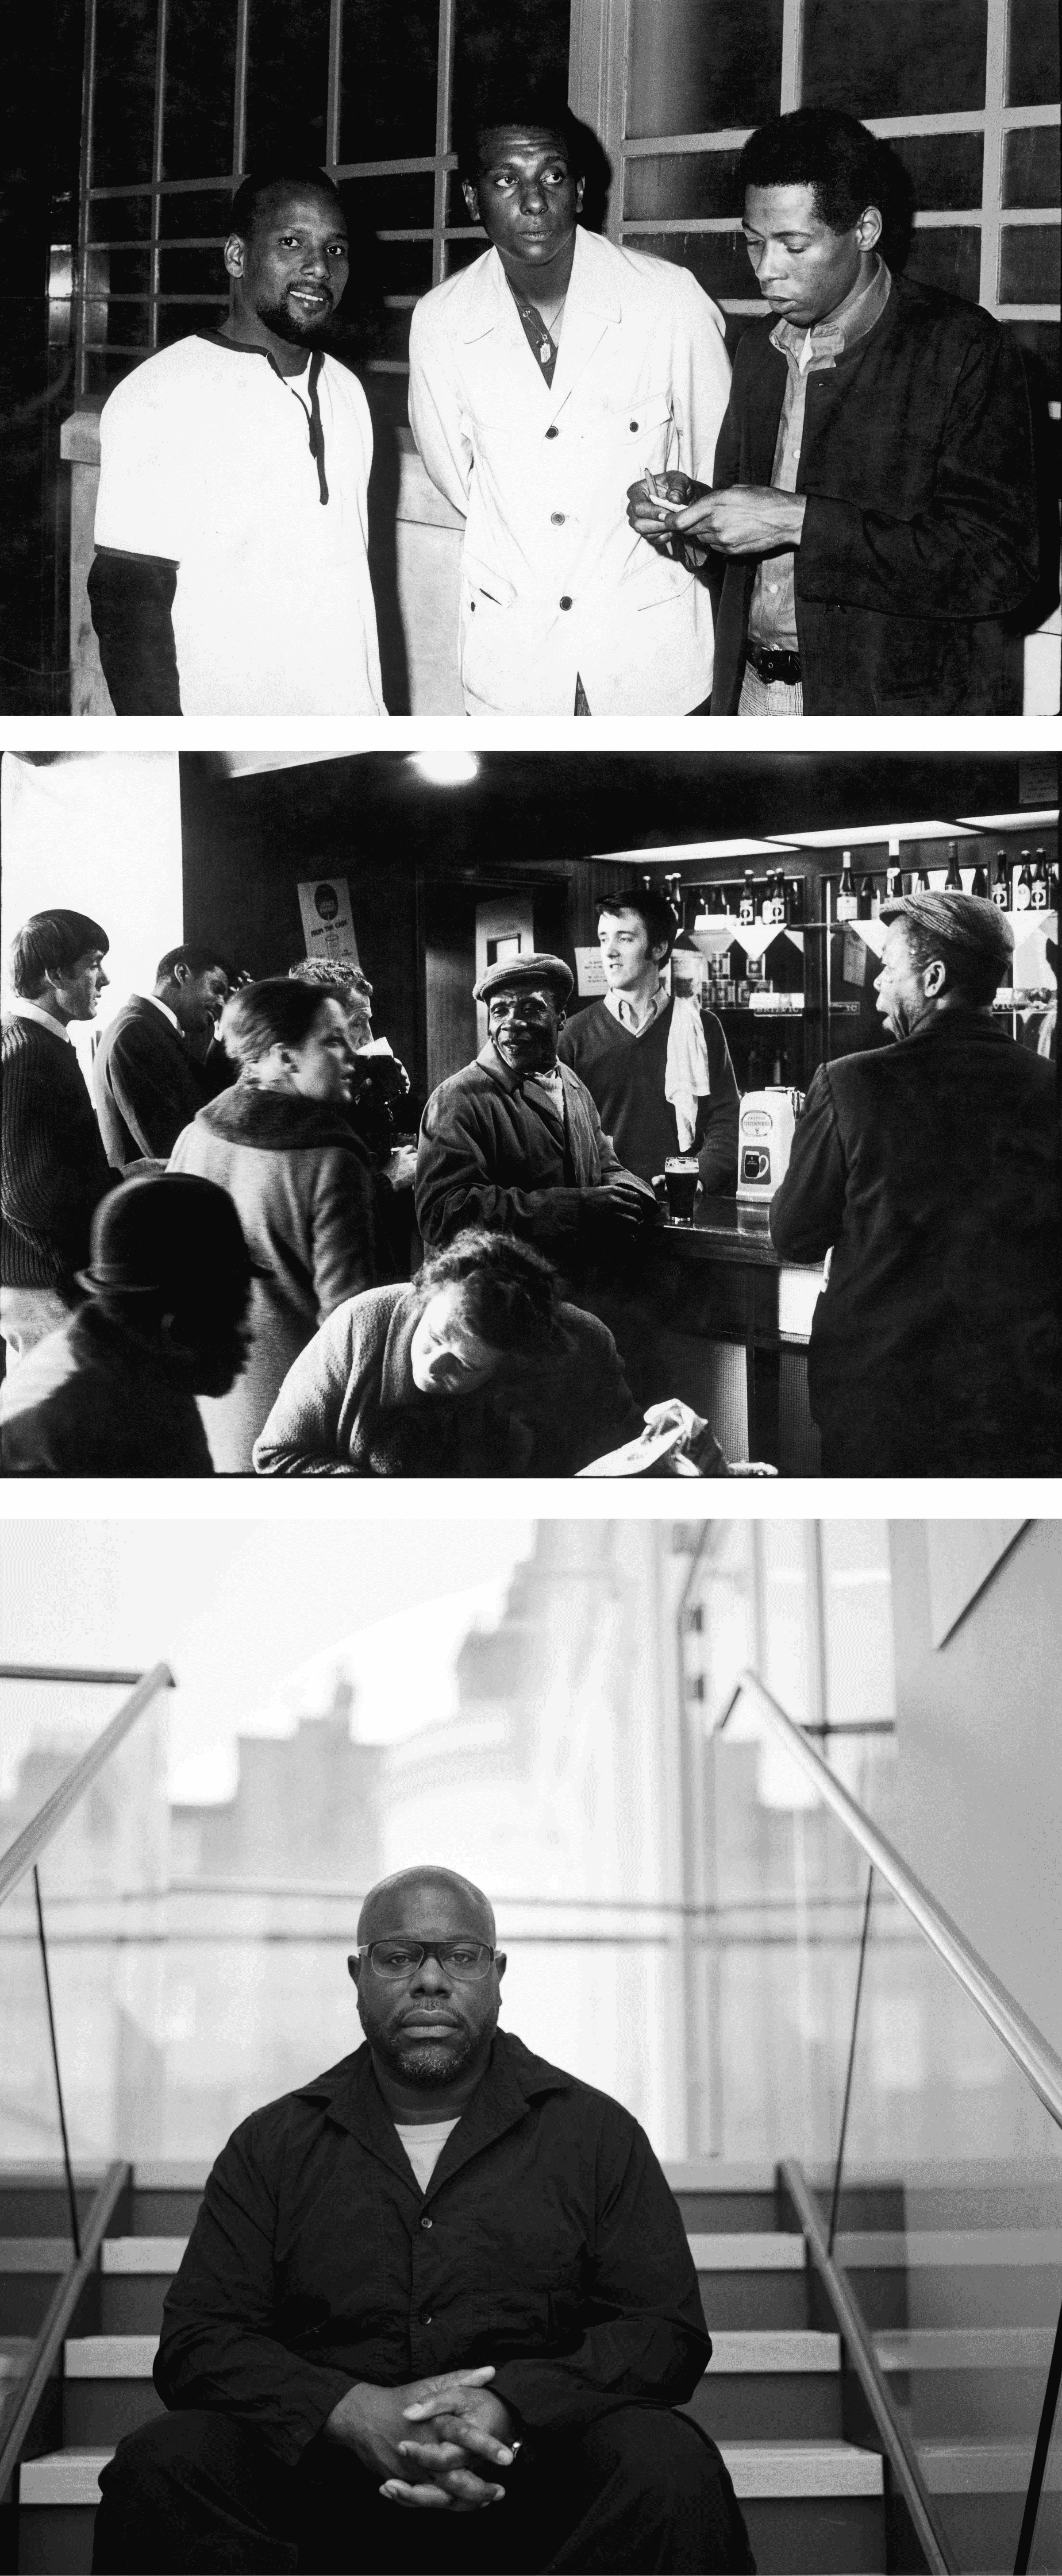 (T) American radical Stokely Carmichael (center) at the Cue Club, 1967 (M) The Piss House Pub, 1969 (B) Steve McQueen, 2020 // © Charlie Phillips / www.nickyakehurst.com